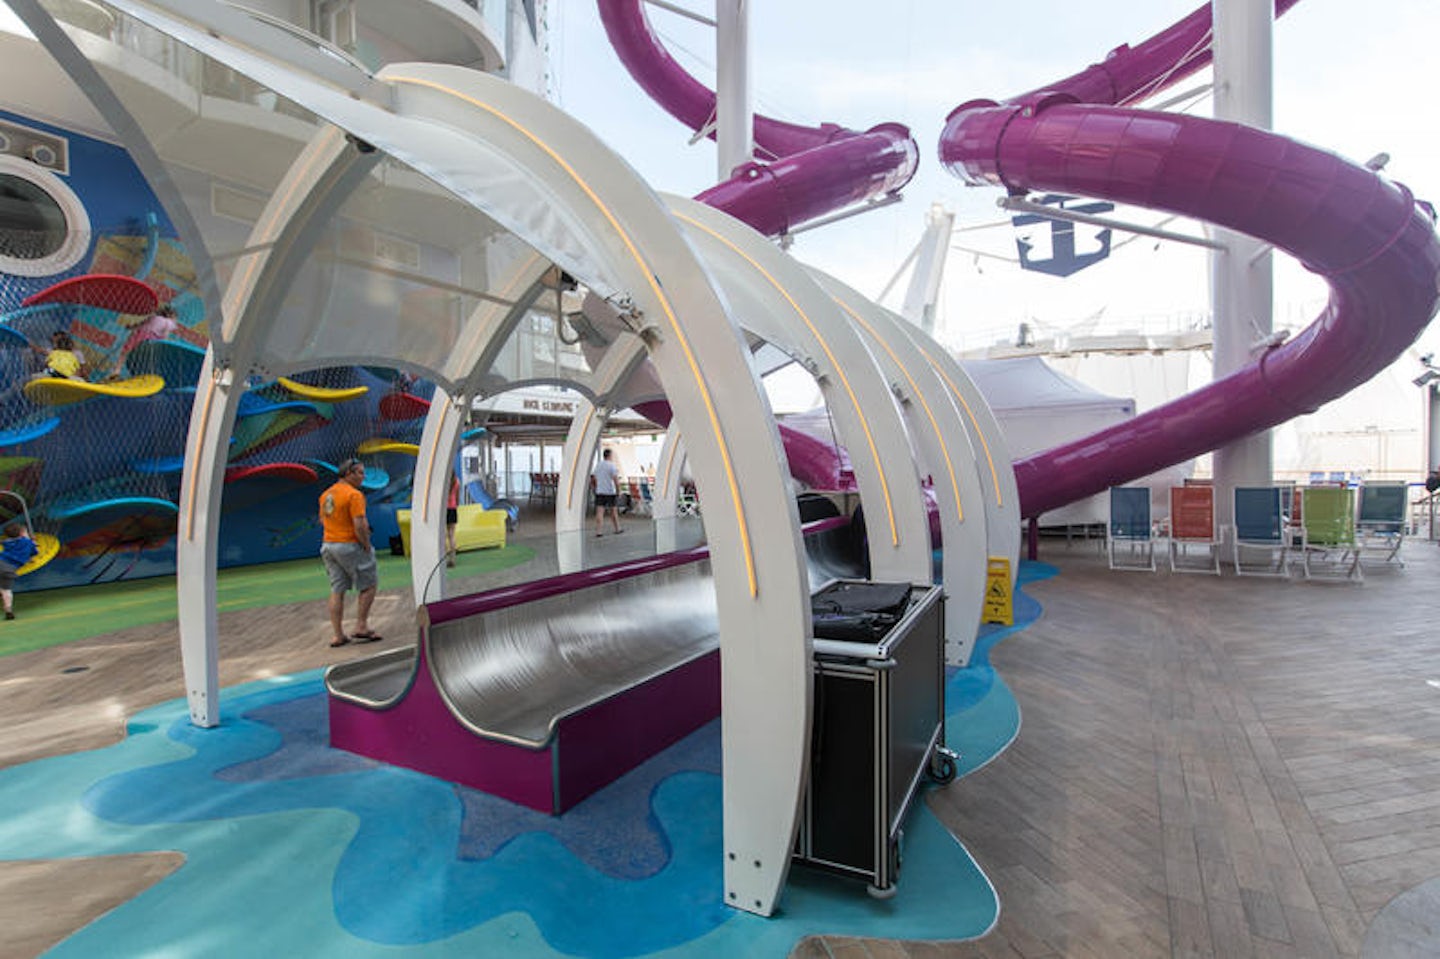 The Ultimate Abyss on Harmony of the Seas